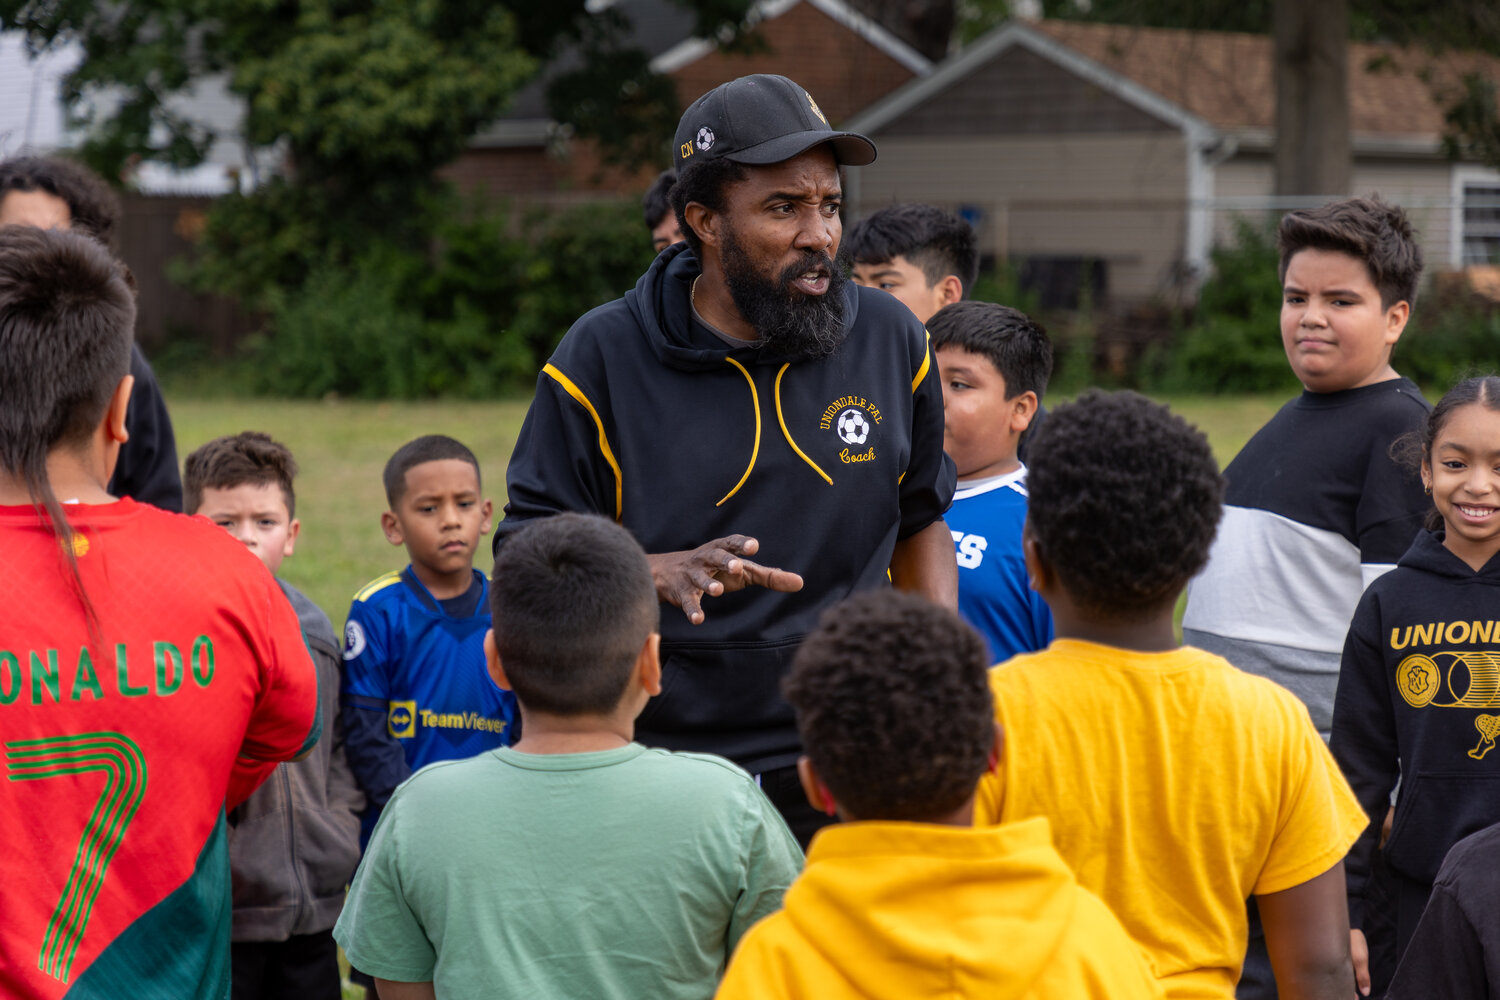 Coach Cohen Nelson, who has run the Uniondale Police Activity League for over 20 years and is also the long standing Uniondale High boys’ soccer coach, working with children at last Saturday’s event.